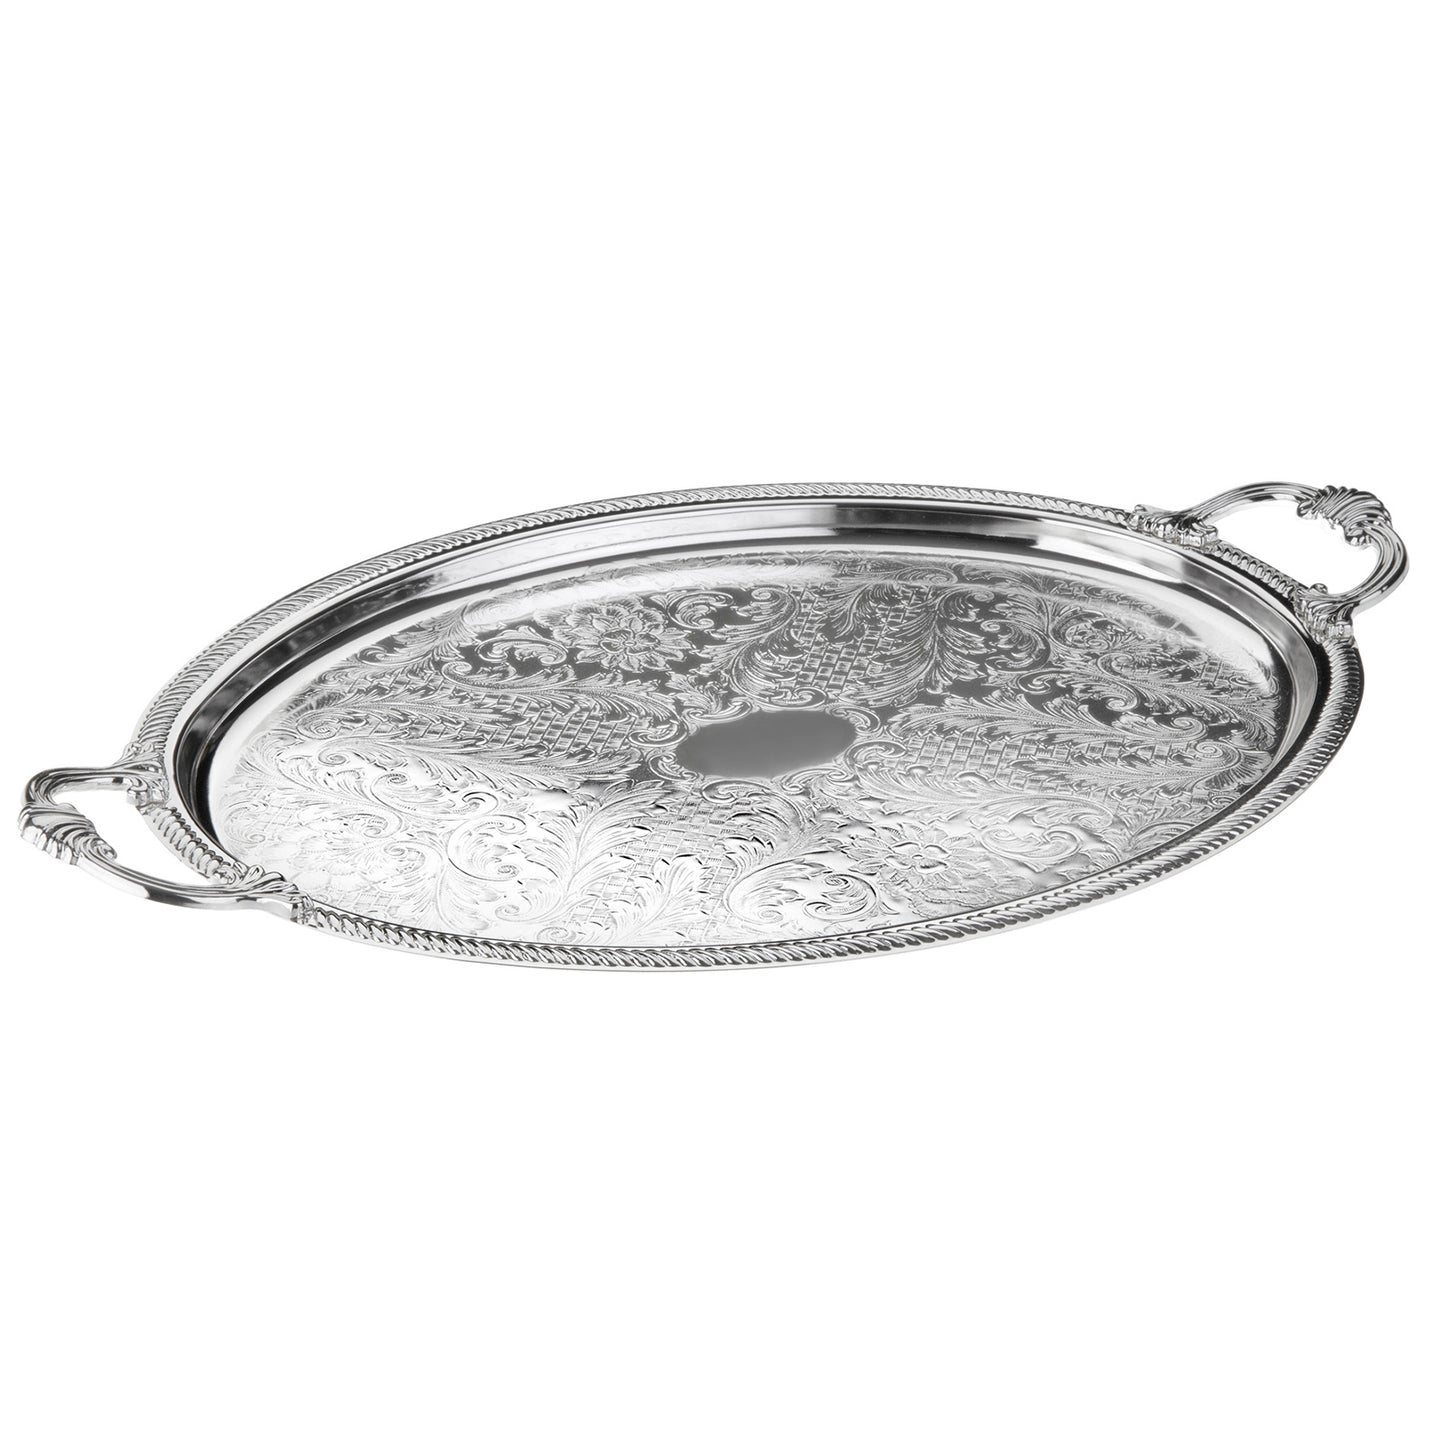 [England Silverware] Shallow Large Oval Serving Tray with Handle 505mm 𝟭𝟬% 𝗢𝗙𝗙